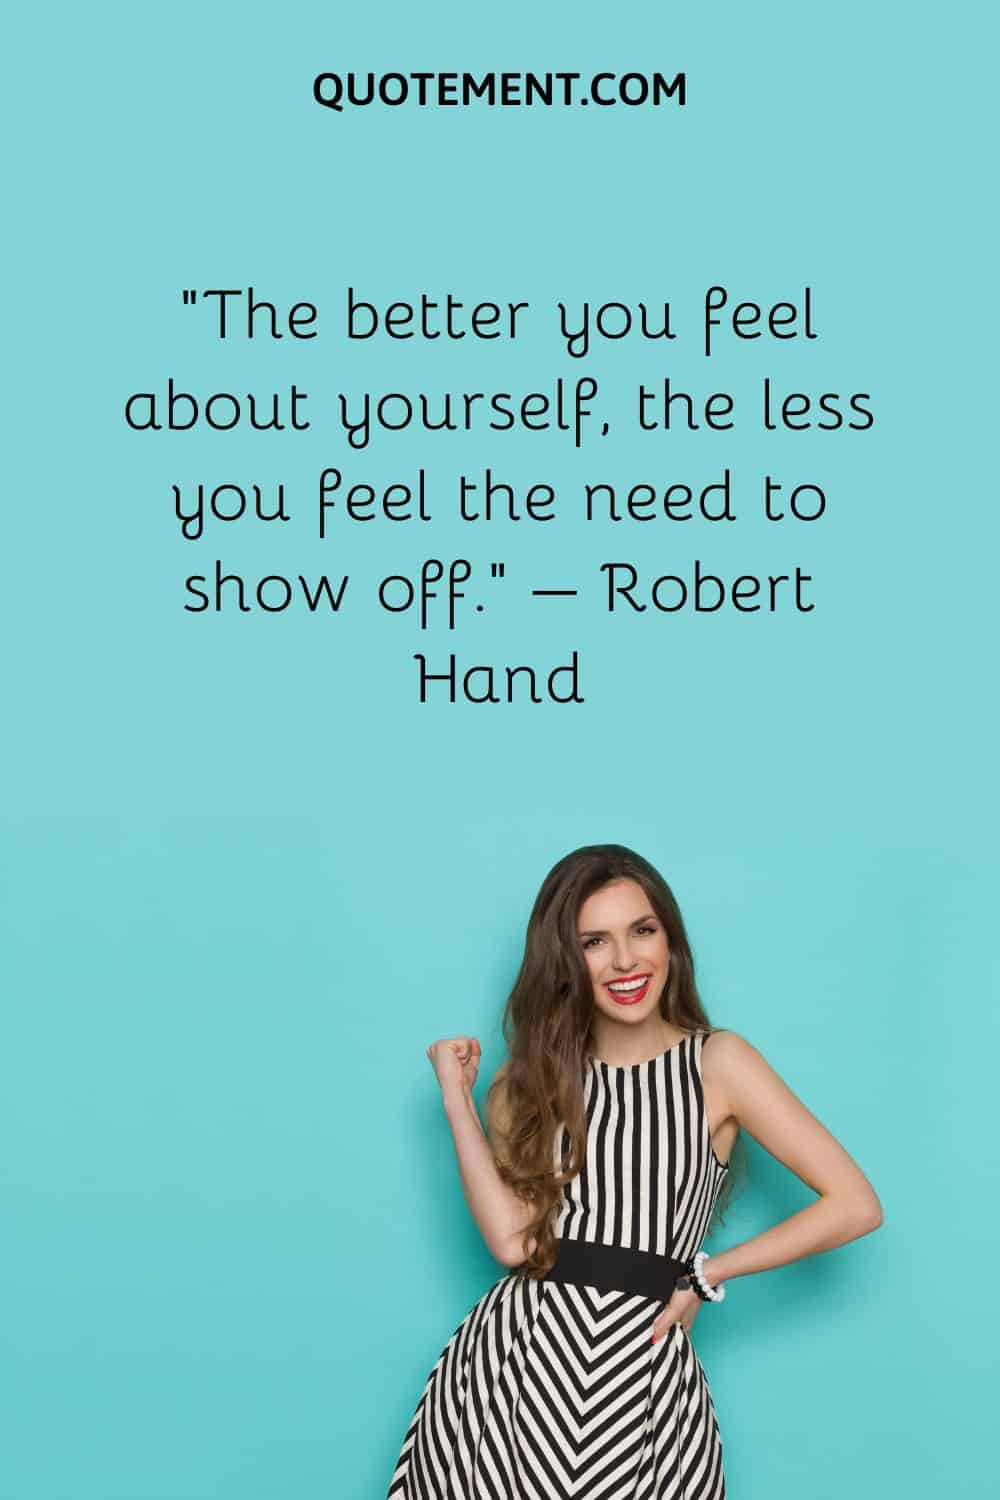 The better you feel about yourself, the less you feel the need to show off